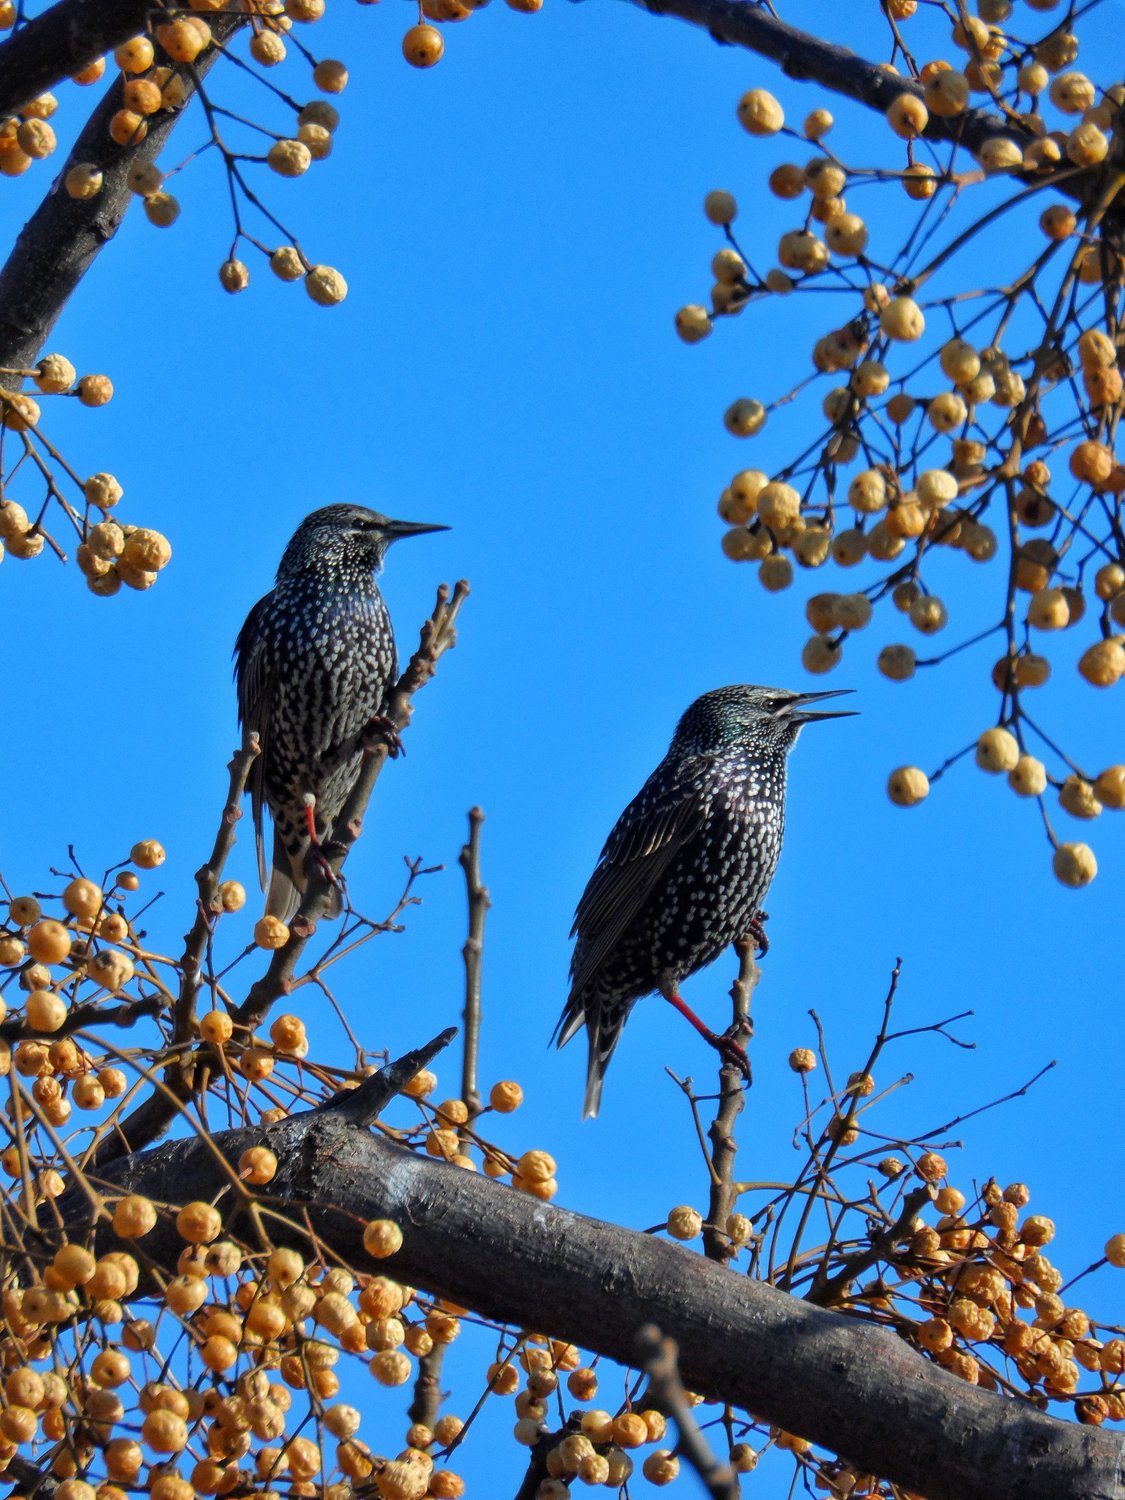 Starlings are an invasive species that brings ruin to many aspects of farming.